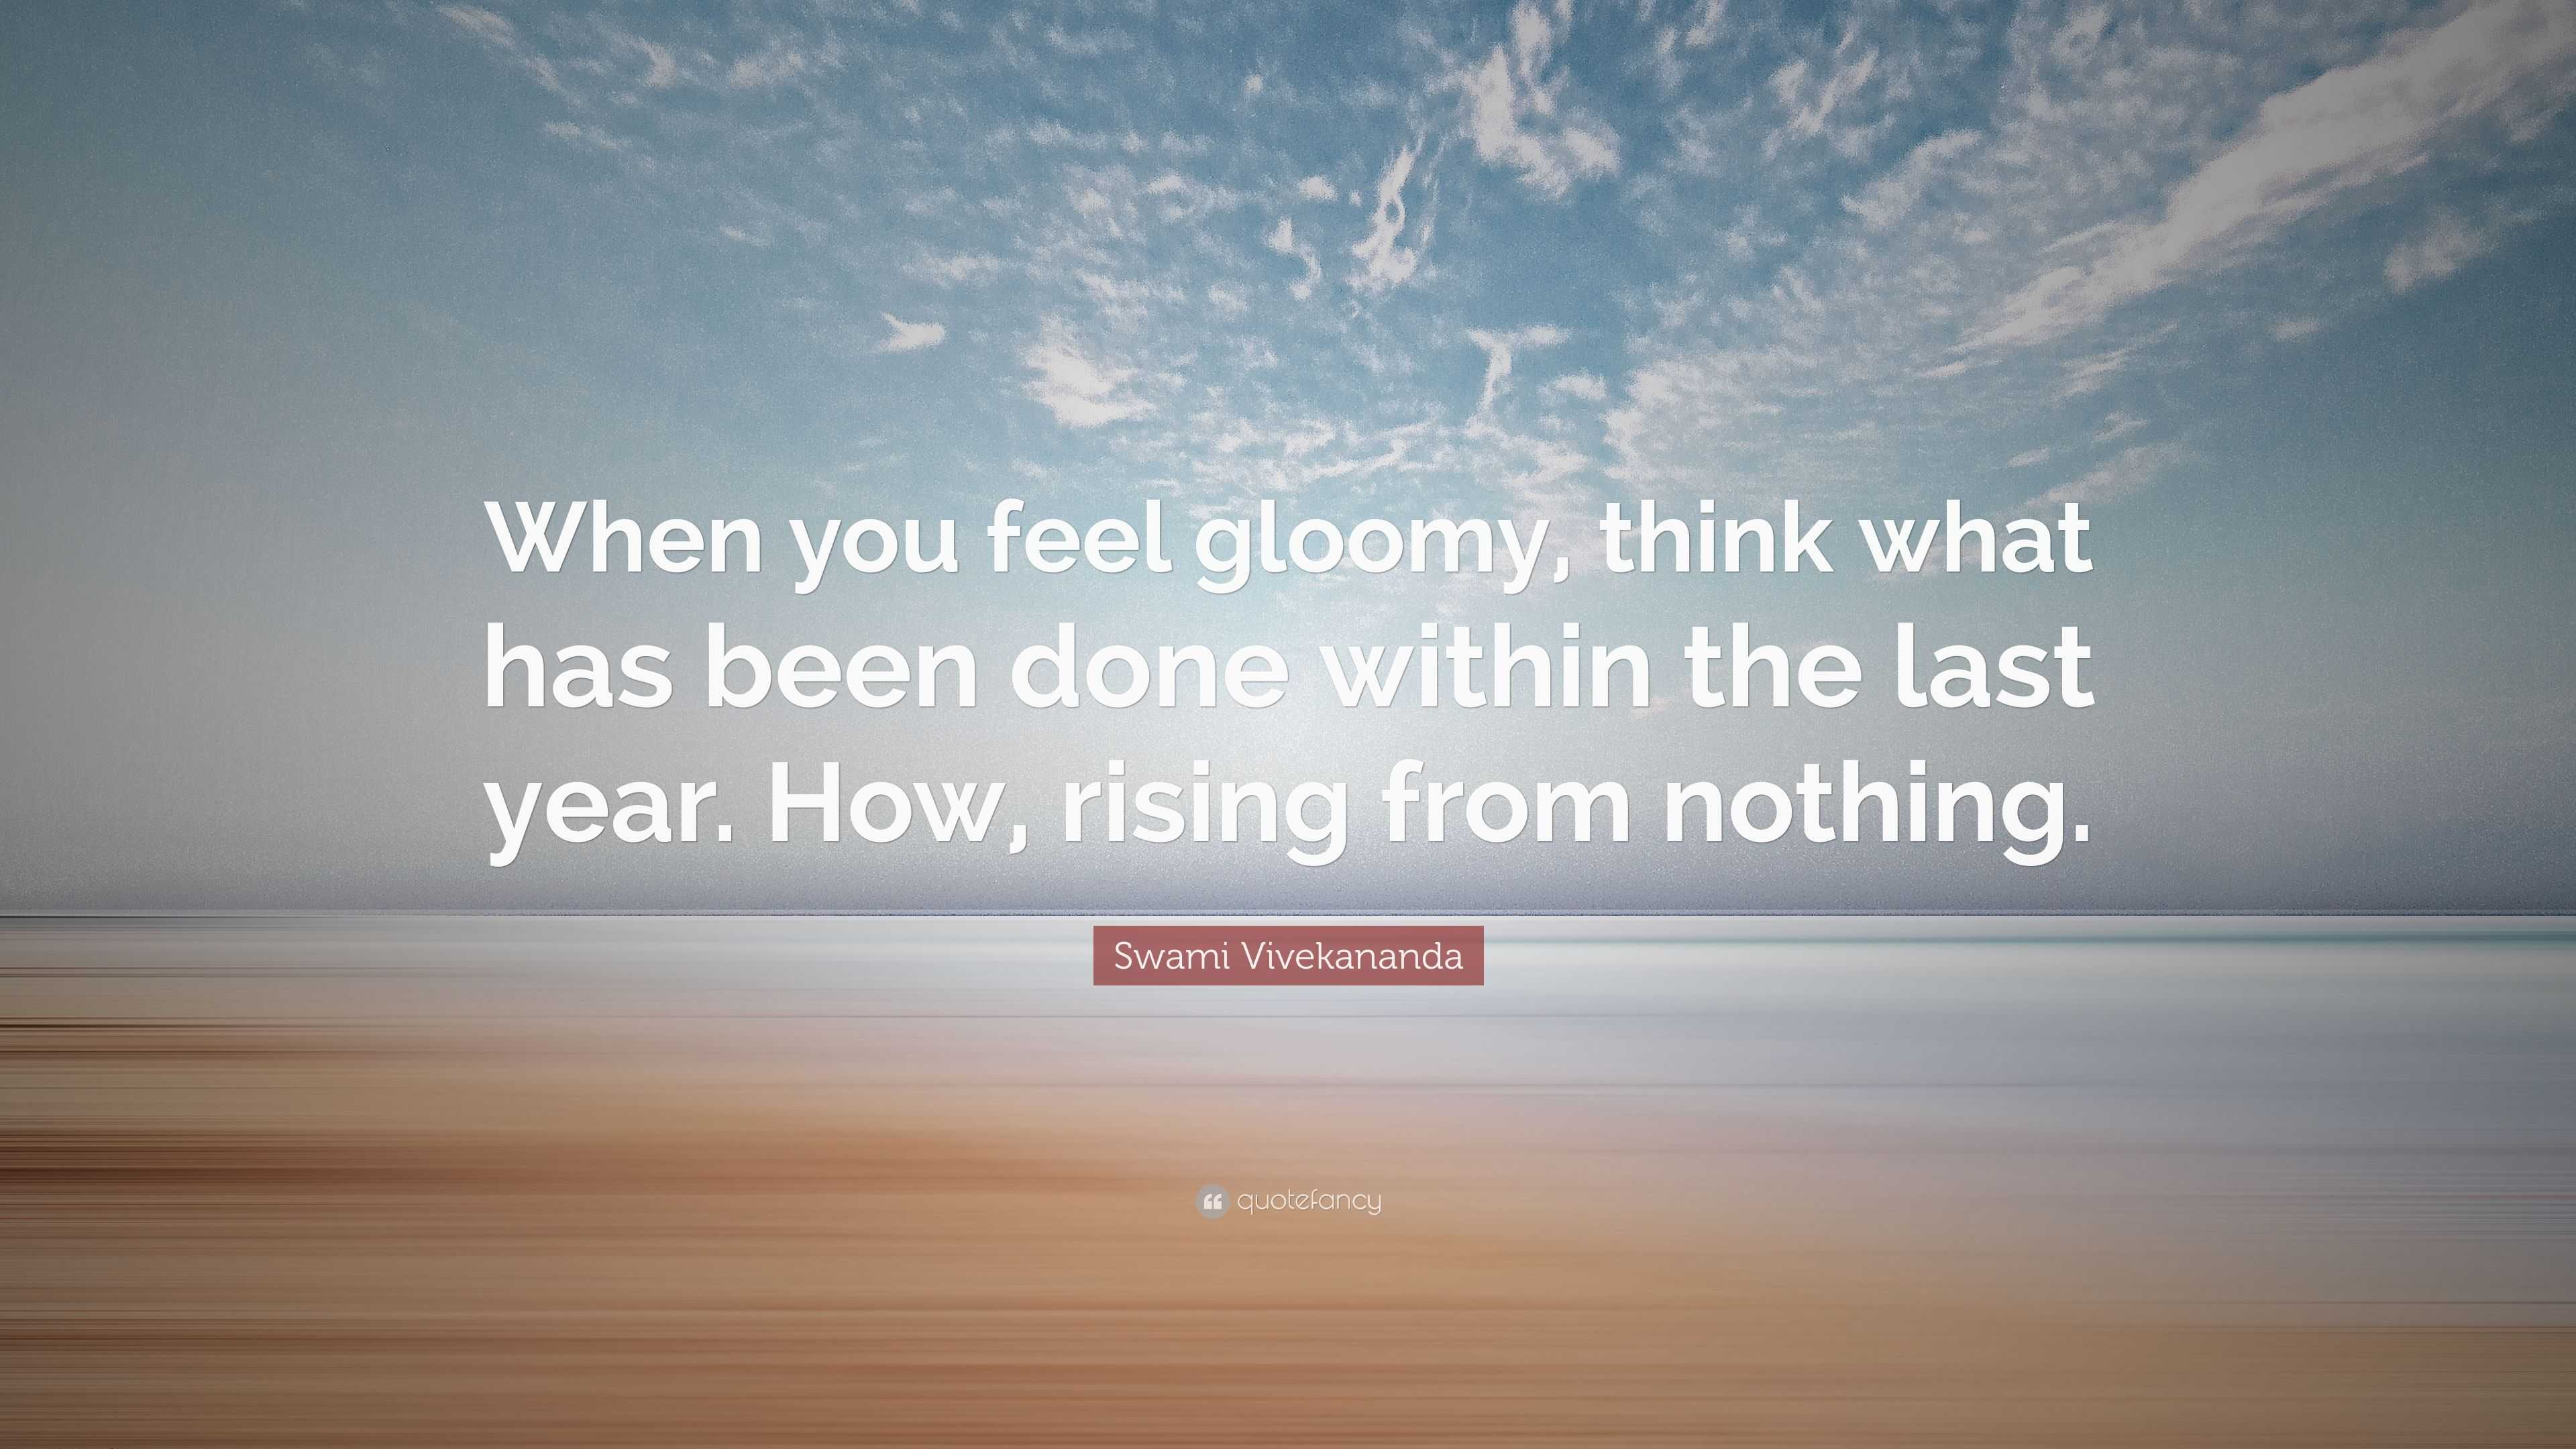 Swami Vivekananda Quote: “When you feel gloomy, think what has been ...